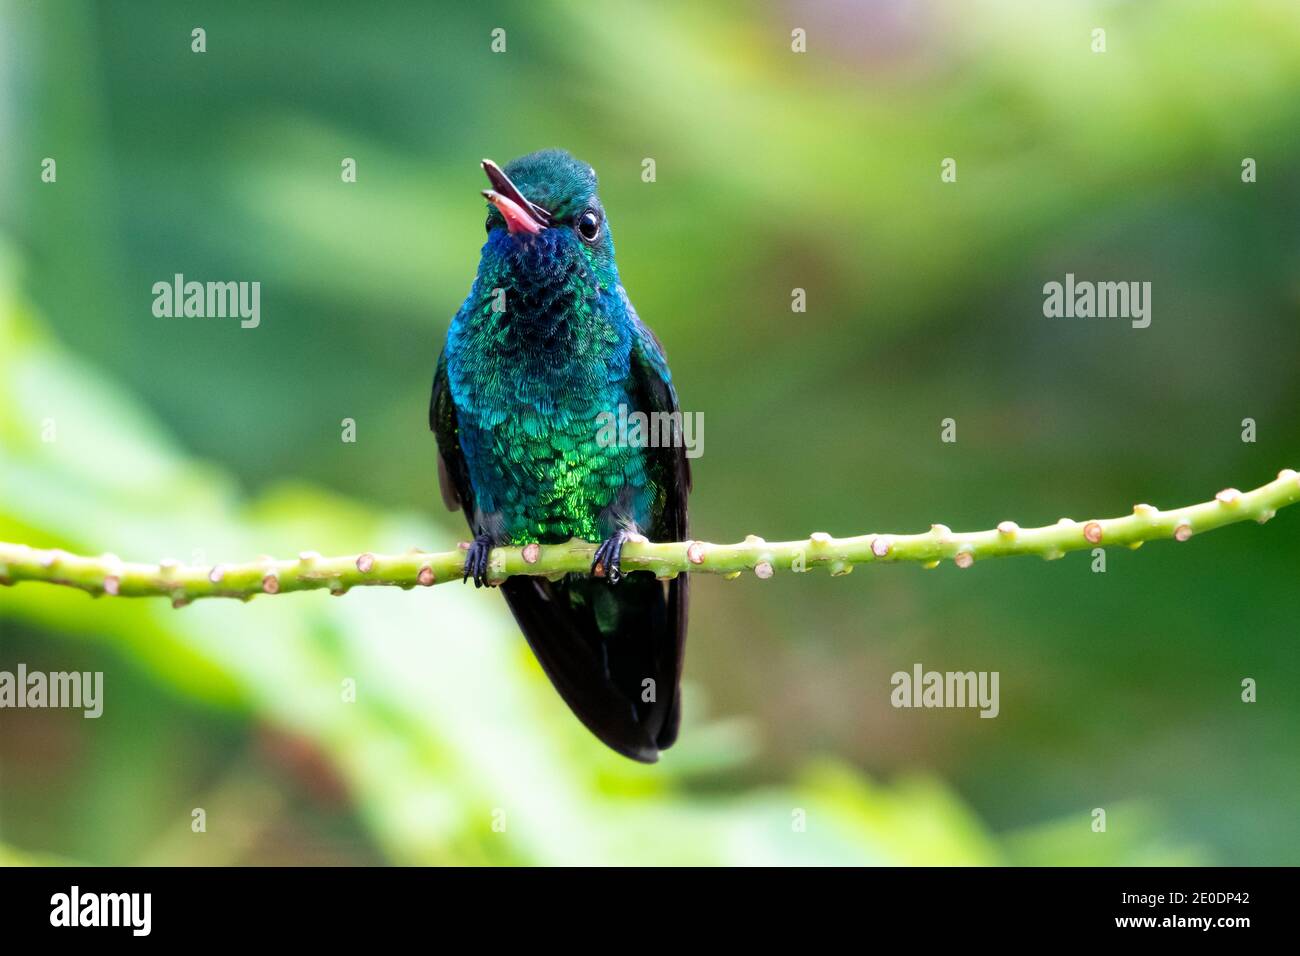 A Blue-chinned Sapphire chirping on a perch looking at camera. tropical bird in a garden. Hummingbird with beak open. Bird singing. Stock Photo